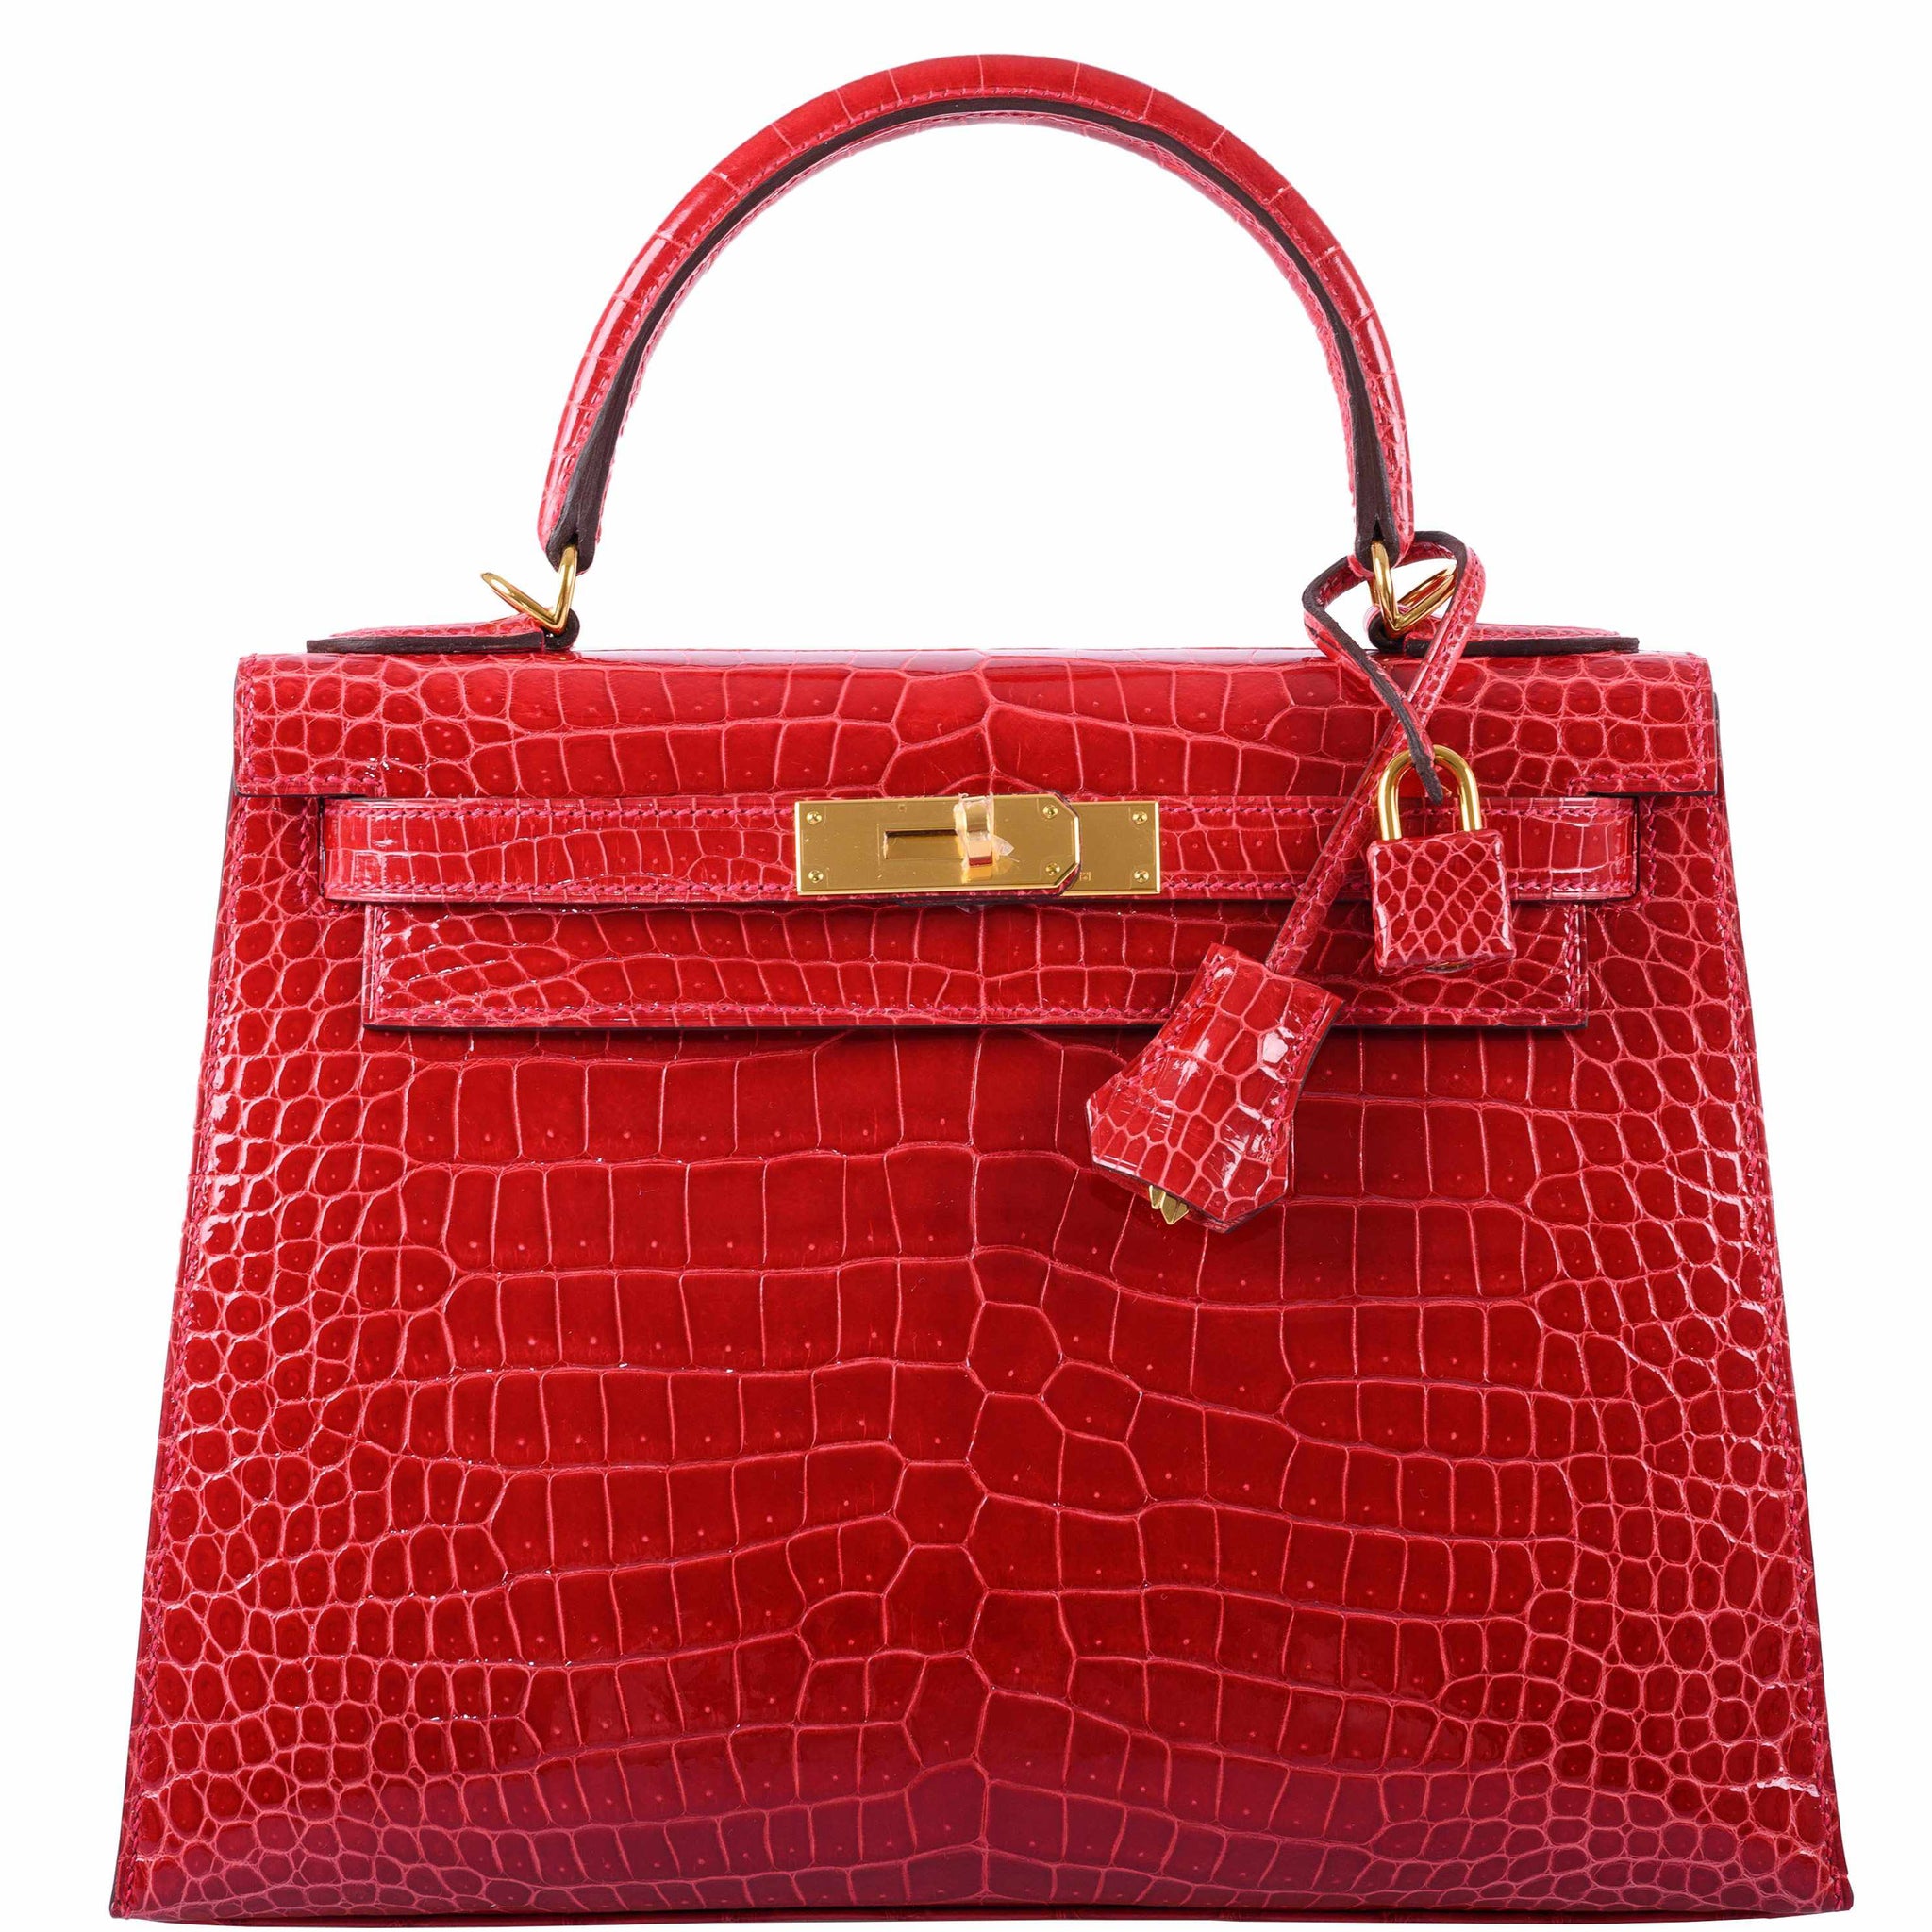 A SHINY ROUGE H POROSUS CROCODILE SELLIER KELLY 28 WITH GOLD HARDWARE, HERMÈS, 1989, 20th Century, bags, Christie's